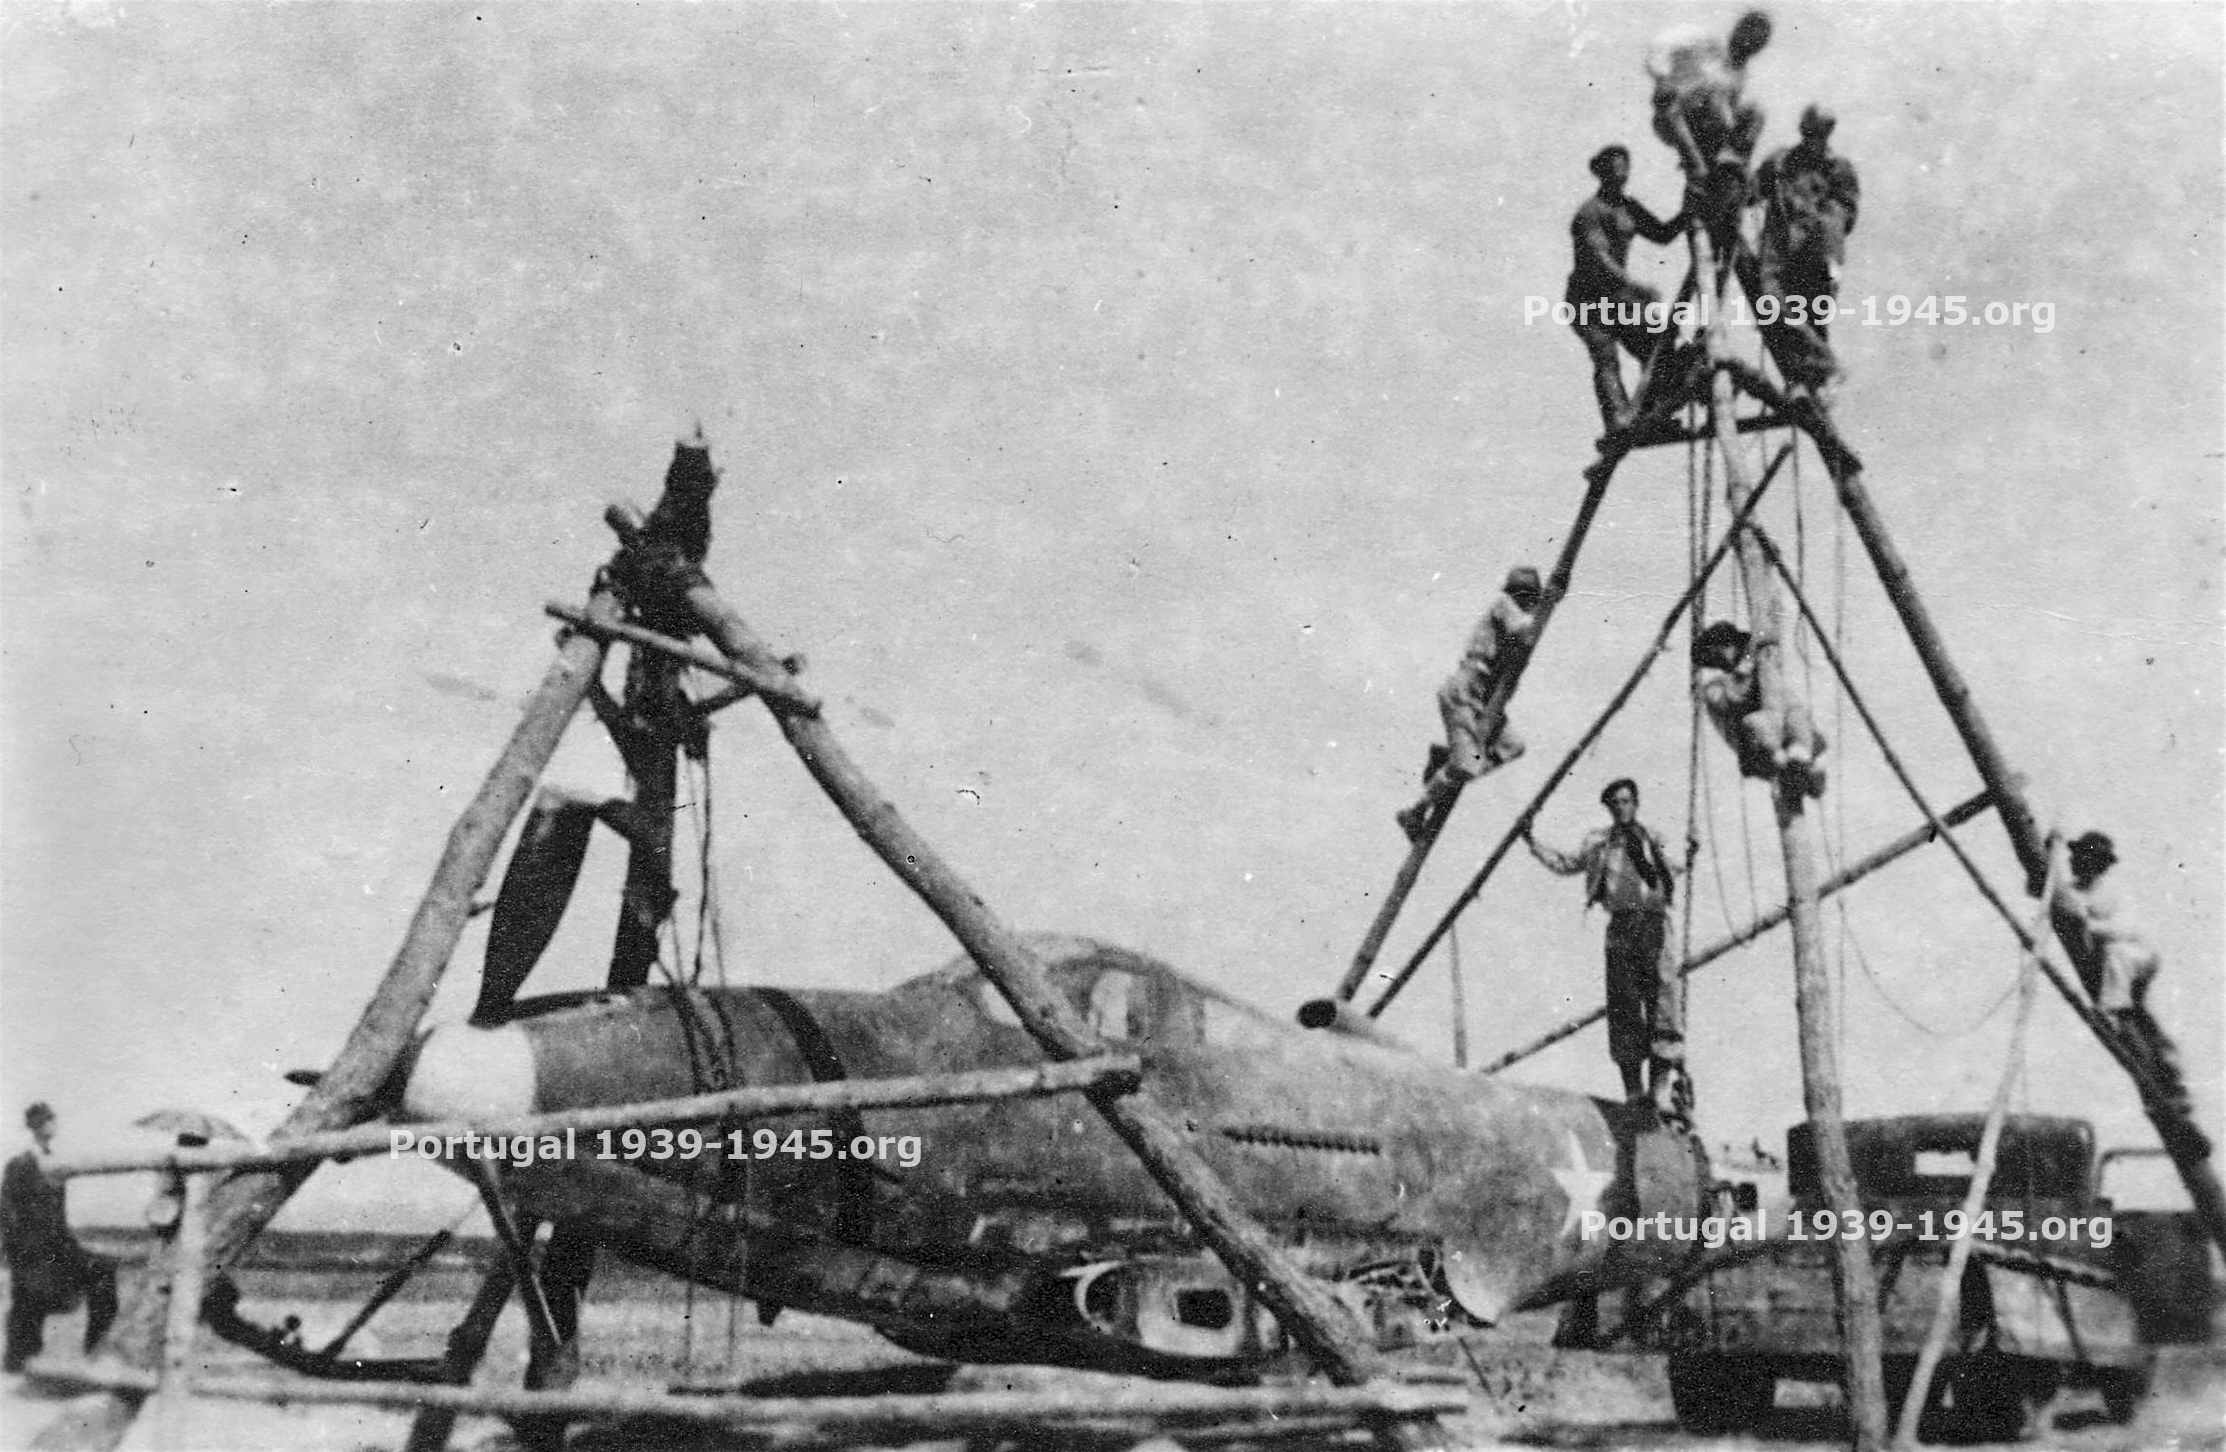 Aircobra being loaded to be transported to Lisbon